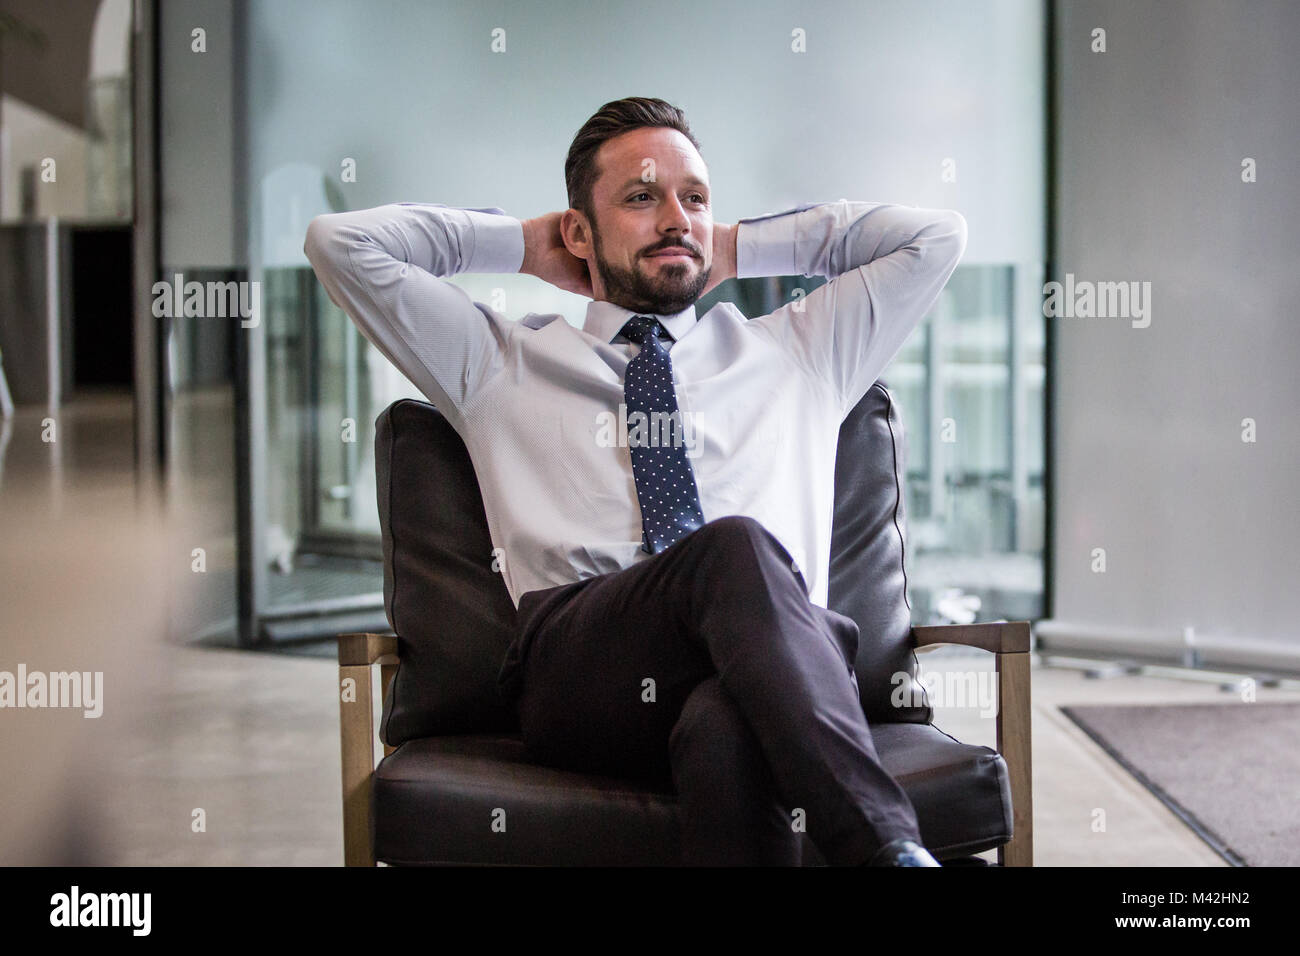 Successful businessman leaning back in chair Banque D'Images